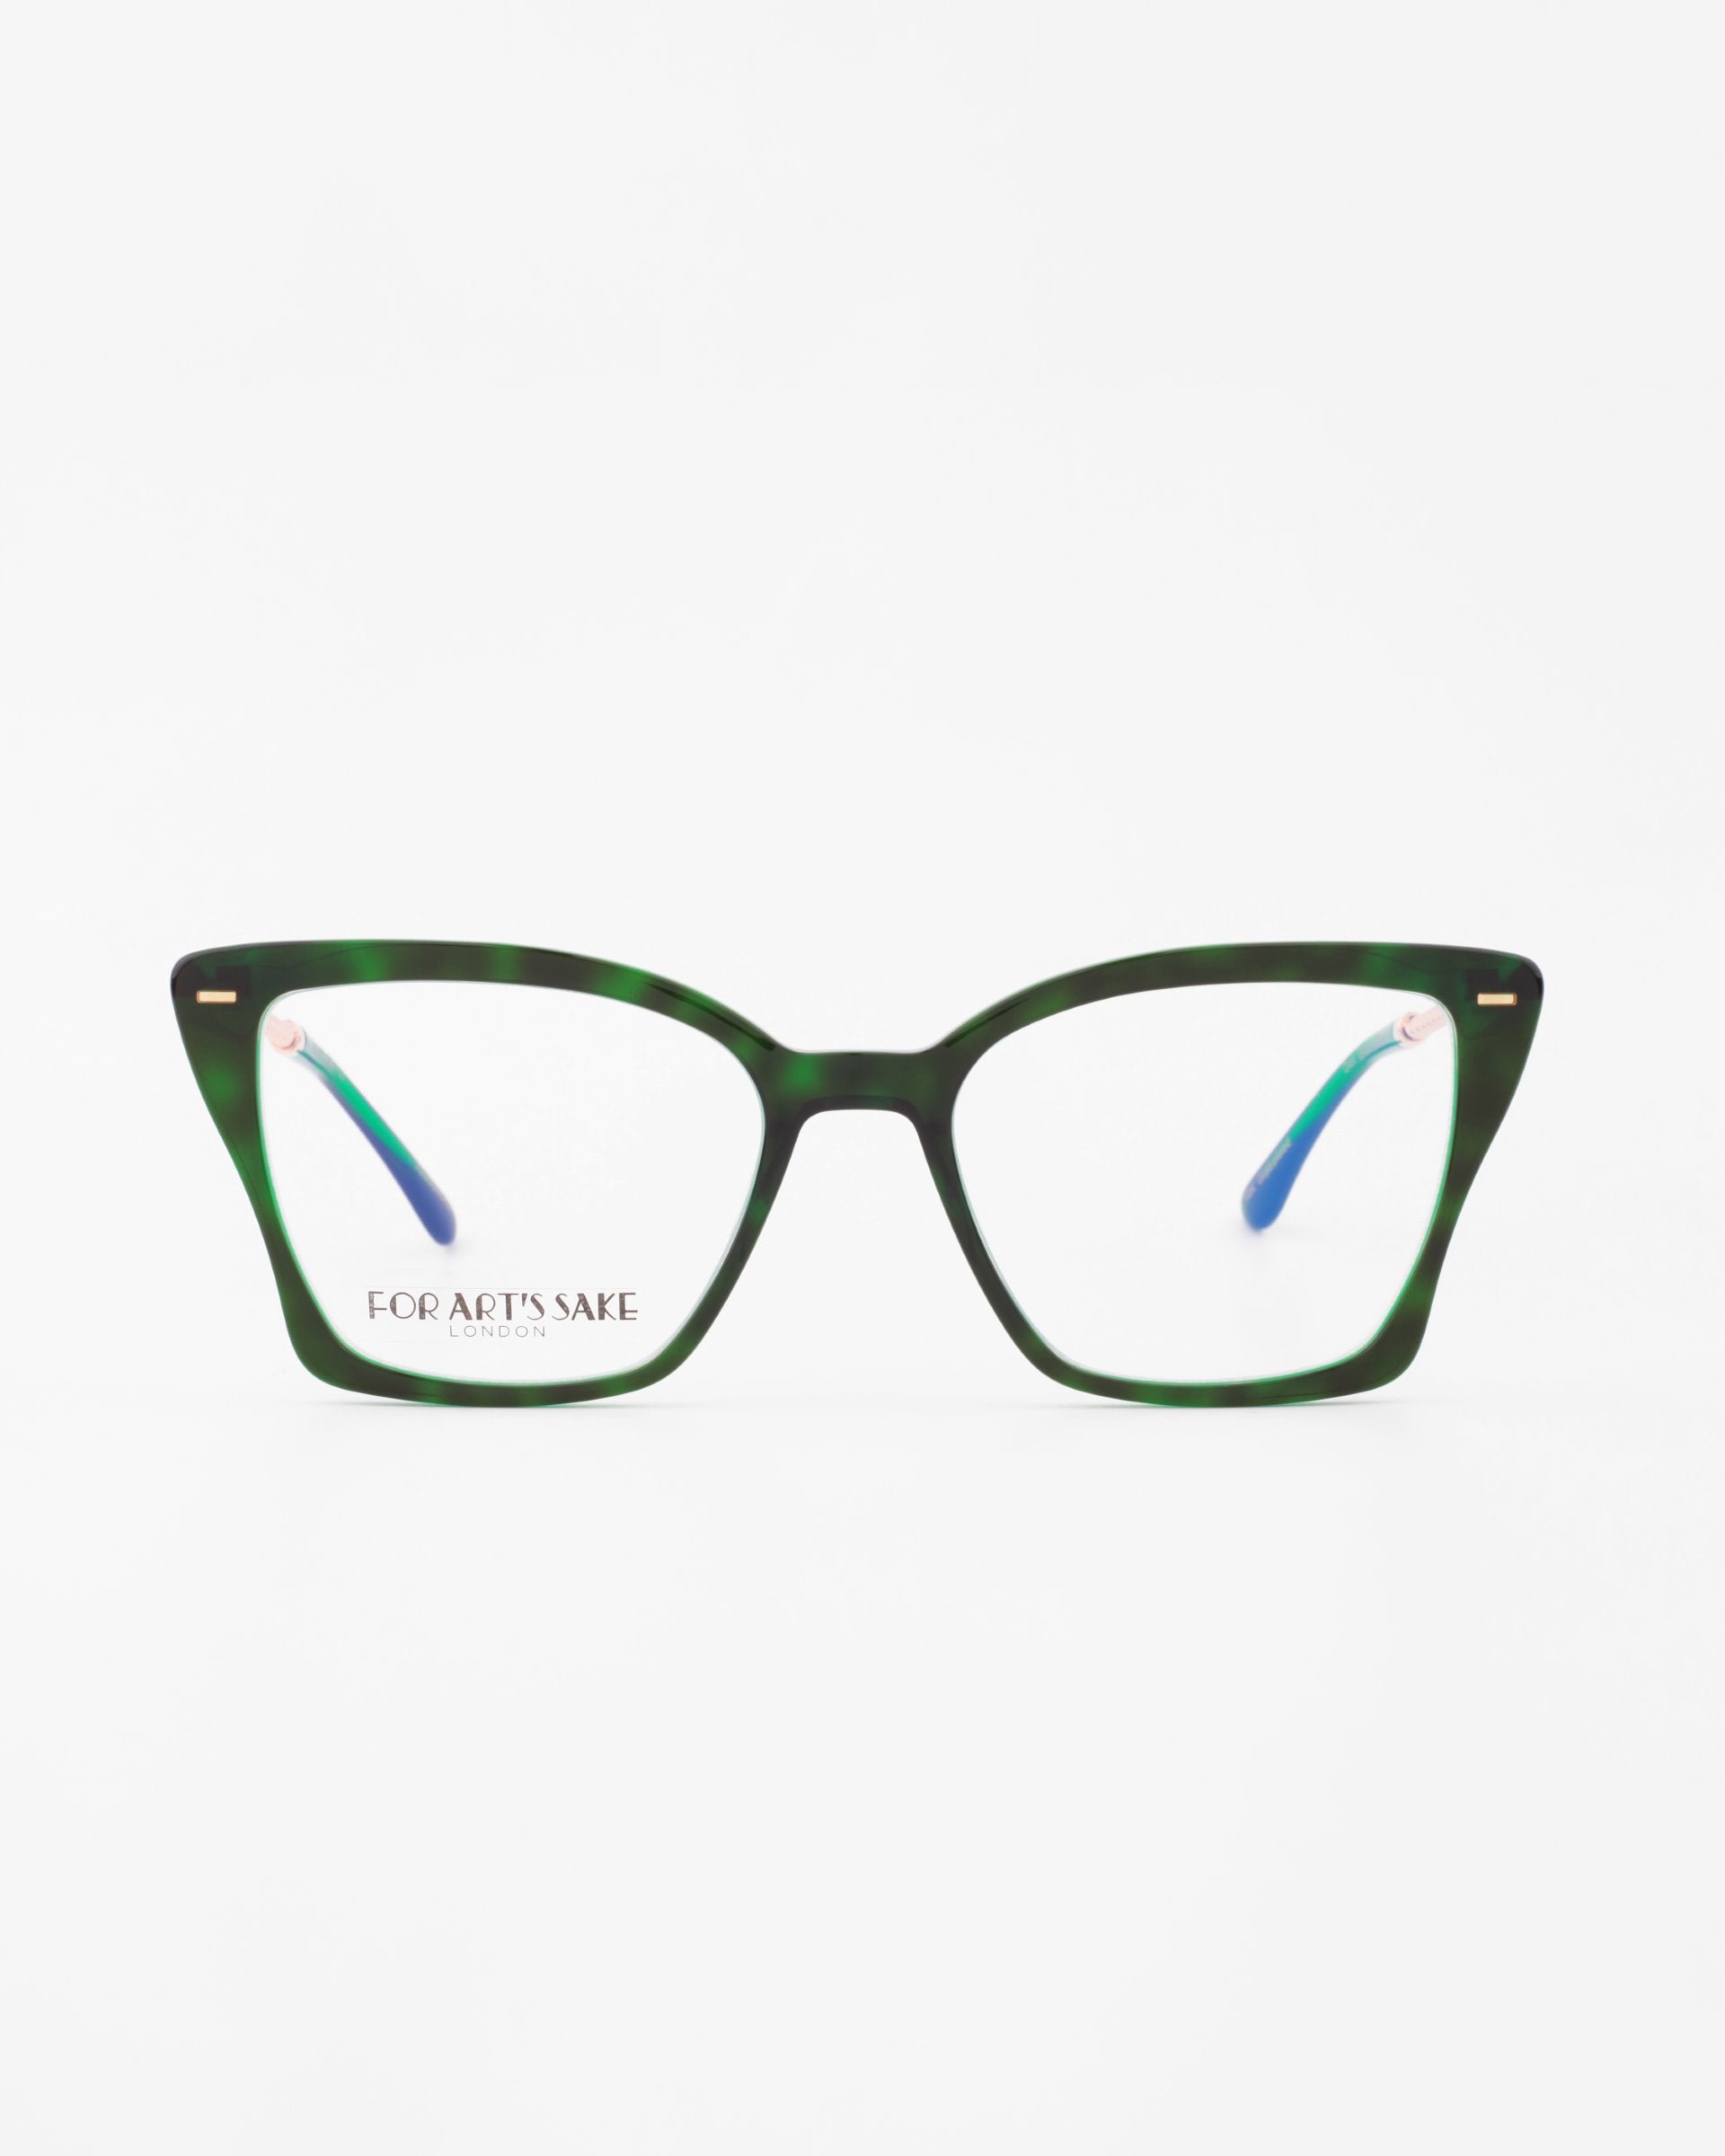 A pair of eyeglasses with dark green, horn-rimmed frames and rectangular lenses featuring blue light filter technology. The temples are blue with gold accents near the hinges, giving them an elegant touch. The brand &quot;For Art&#39;s Sake®&quot; is written on the left lens. The background is white.